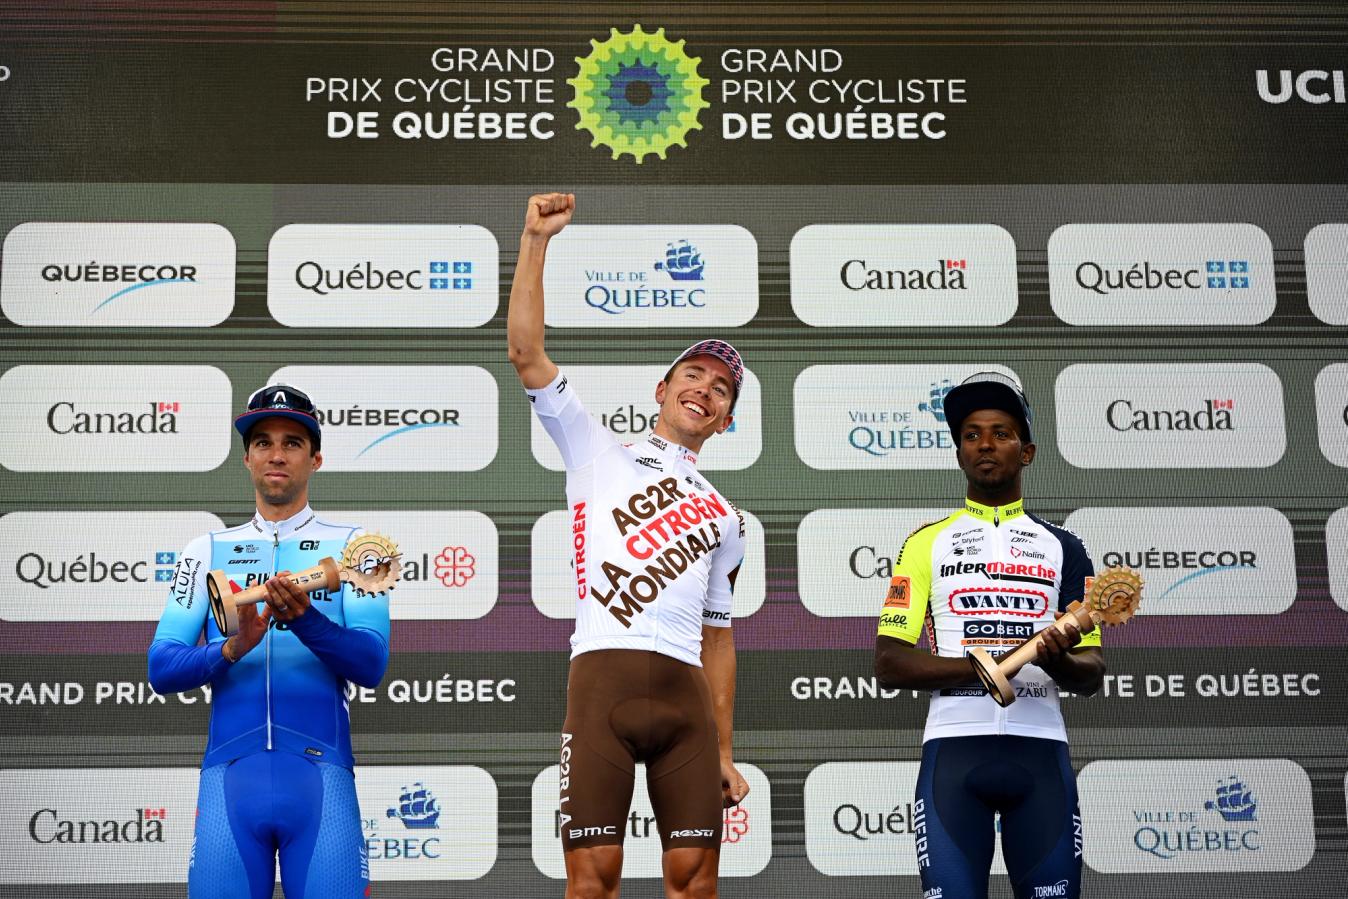 While the some of the top riders are skipping this years Canadian one days, the podium of the GP Quebec will all be back